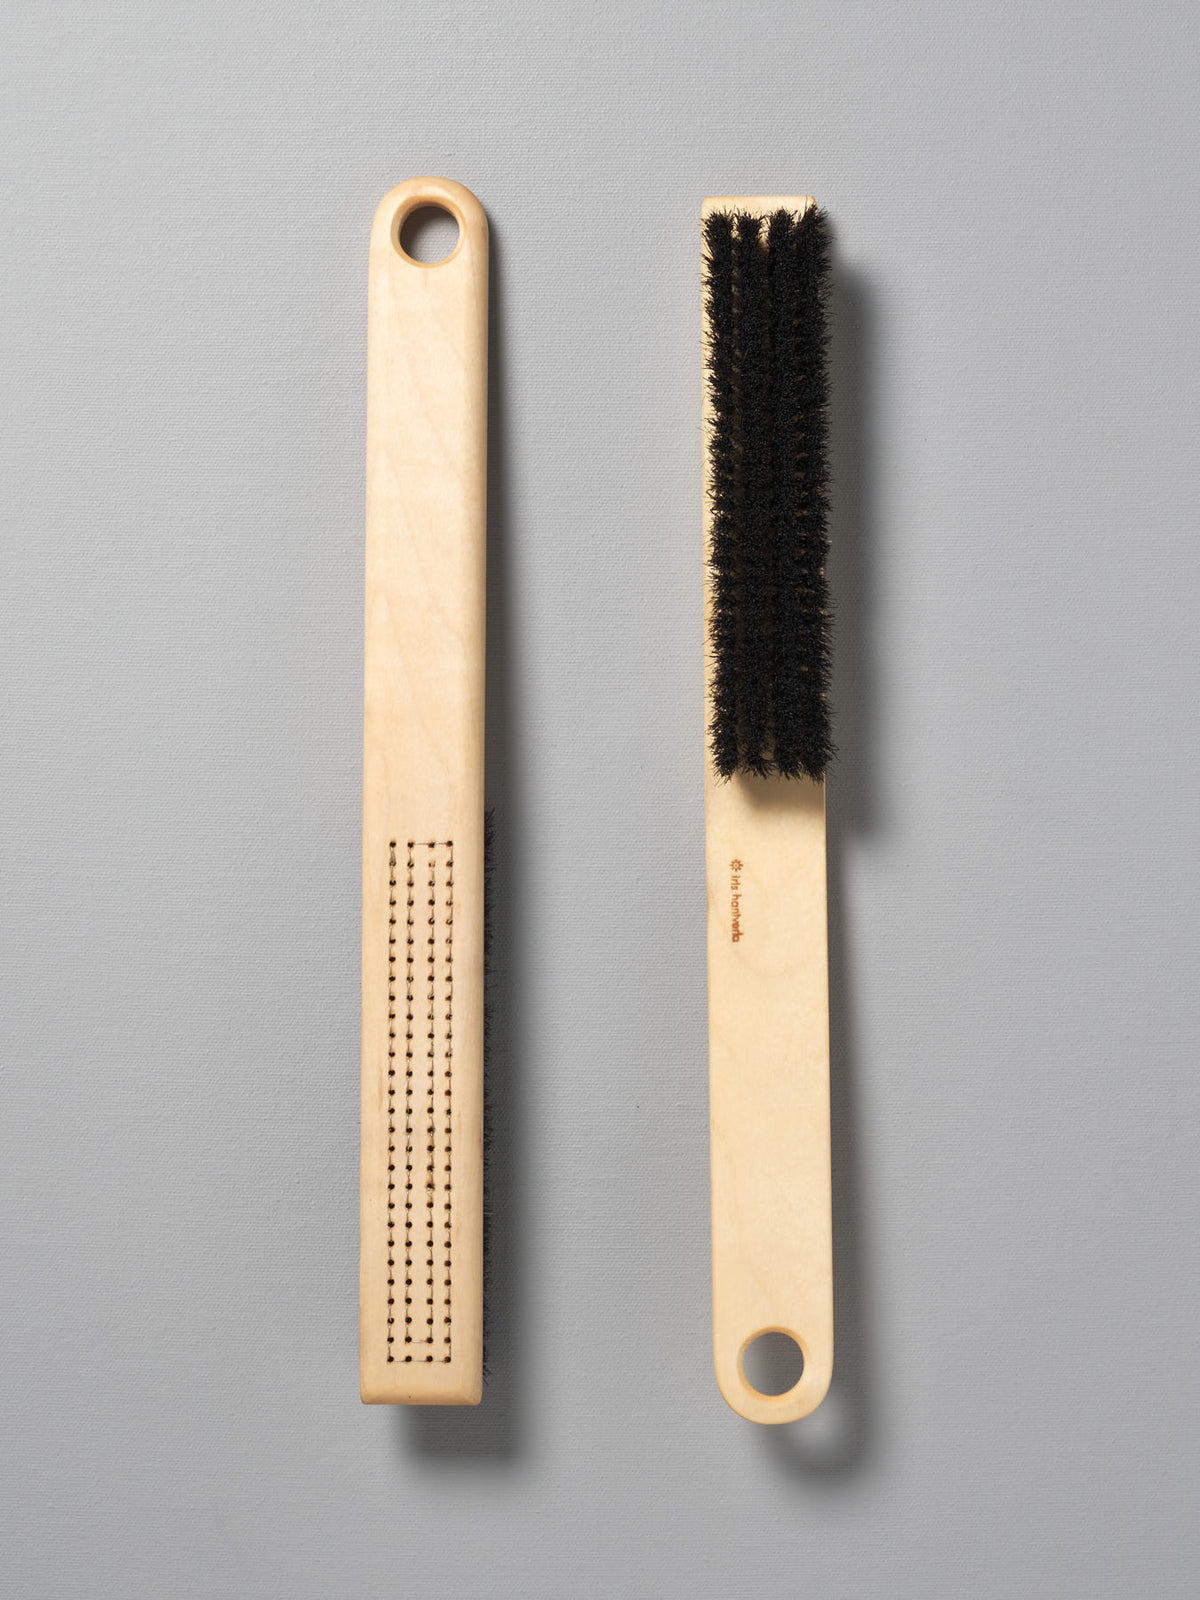 Two Iris Hantverk clothes brushes next to each other on a grey surface.